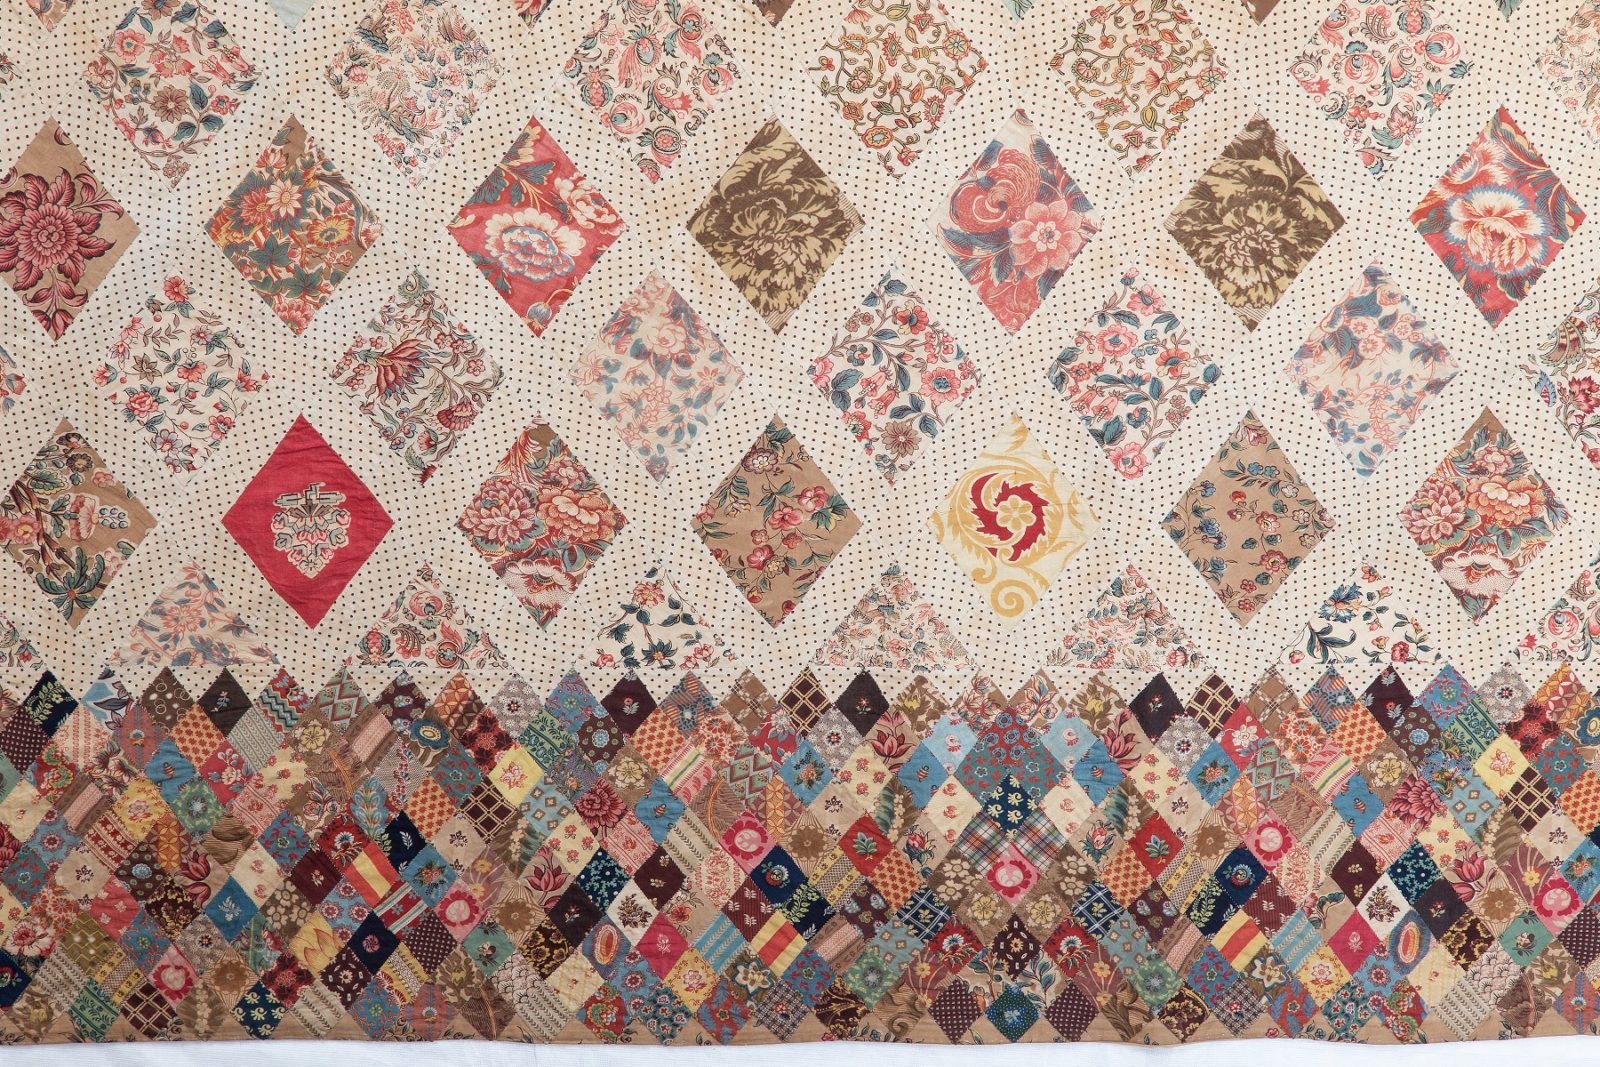 Close up of the Austen family patchwork coverlet, showing border made of small diamonds